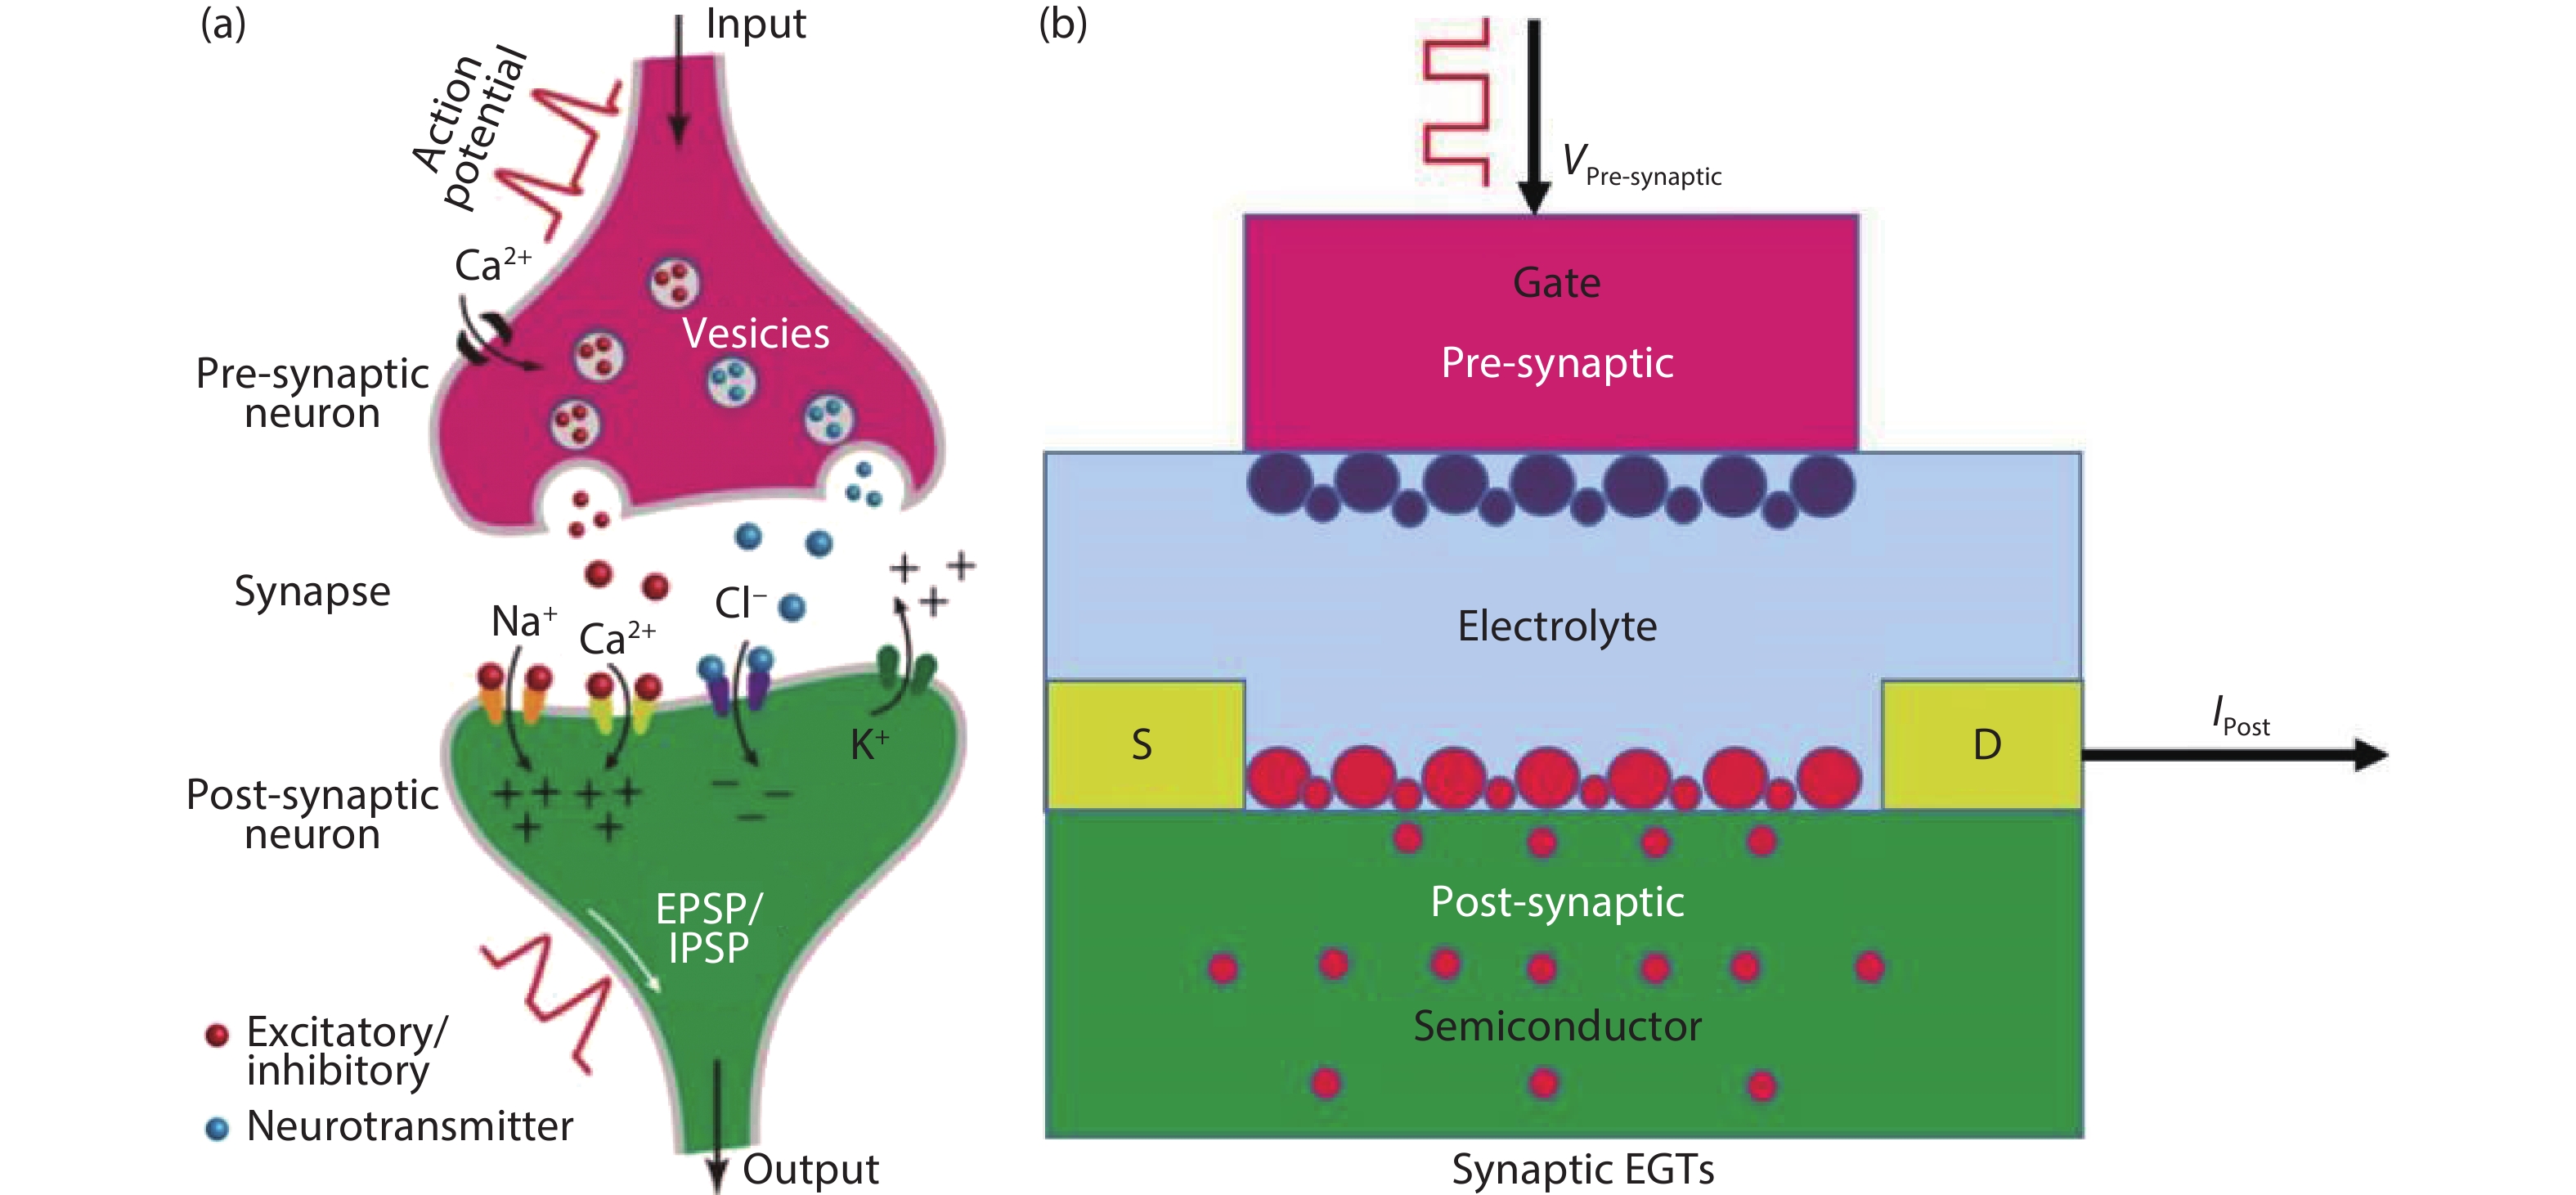 (Color online) (a) Schematic of a biological synapse[34] and (b) an EGT-based artiﬁcial synapse. The synaptic weight (channel conductance) can be modulated in this device using electrochemical intercalation to adjust the small ion concentration in the semiconductor.